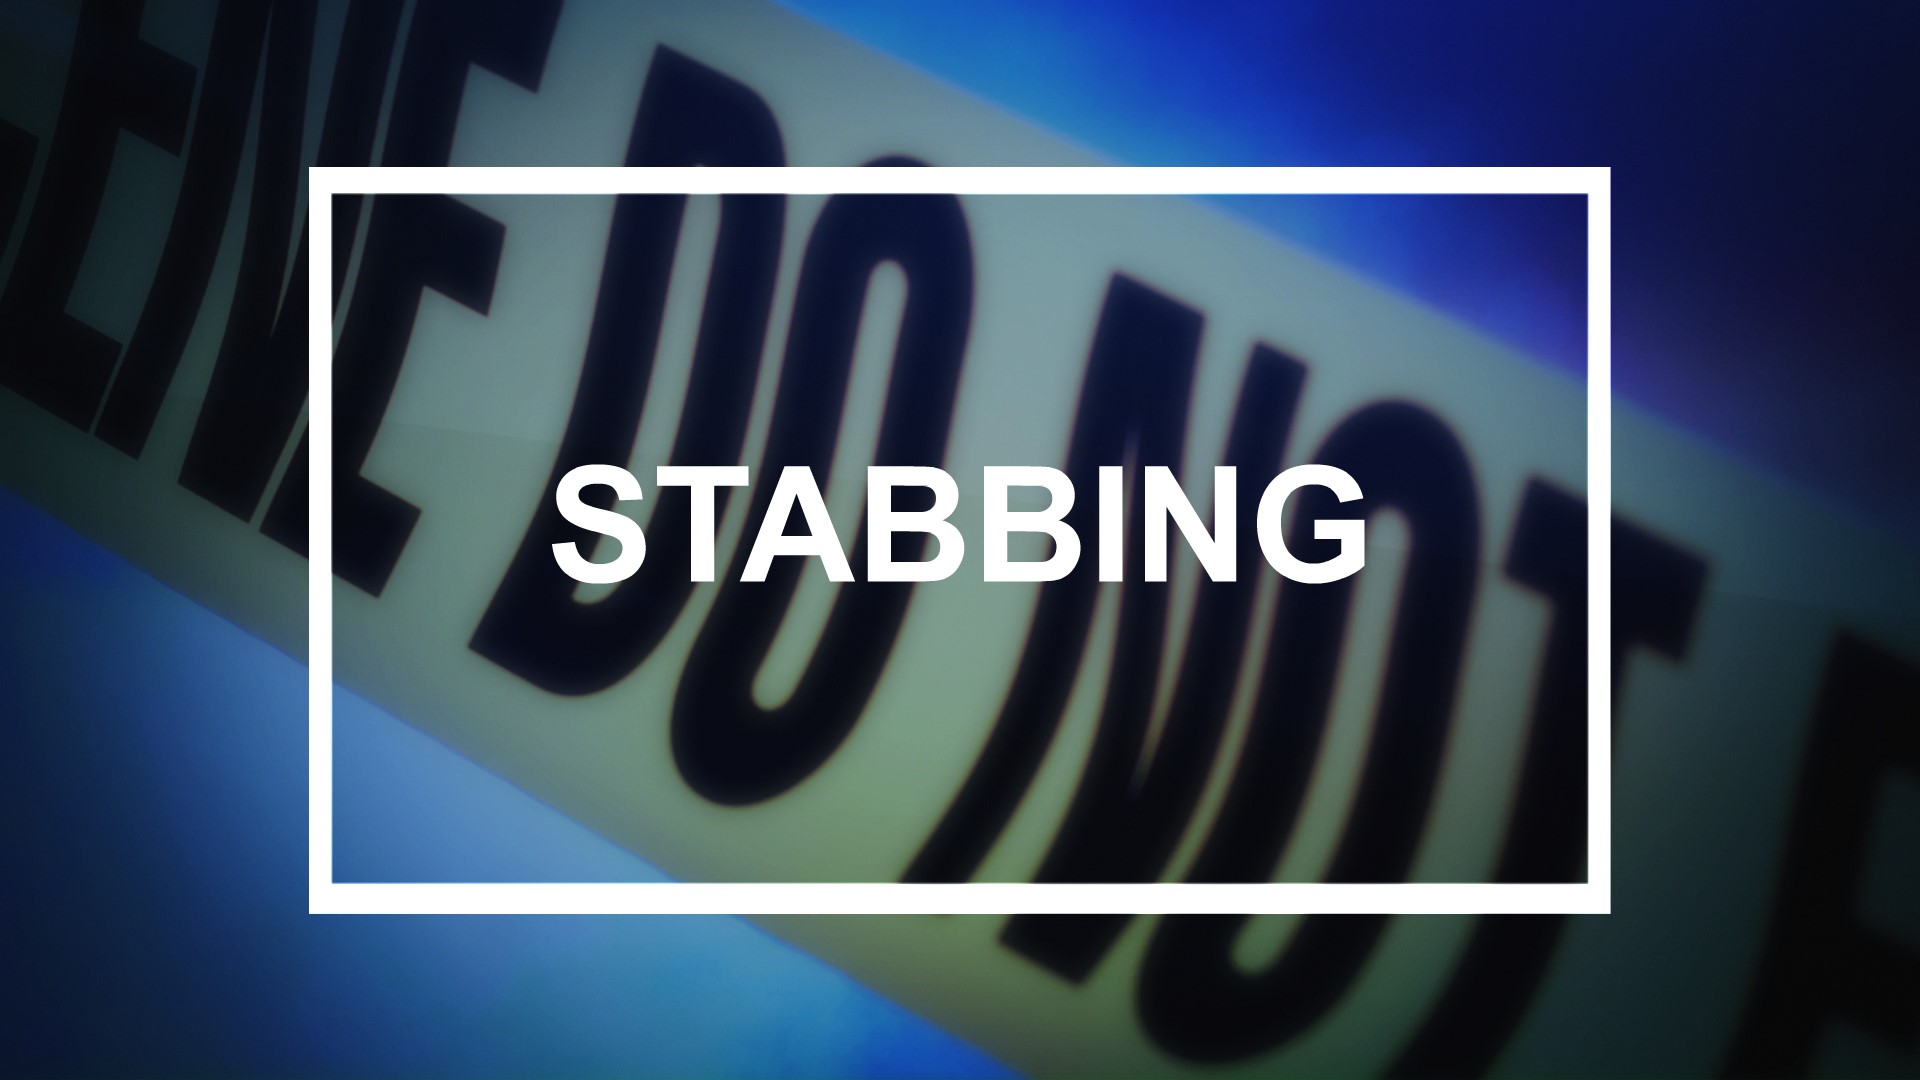 Police are searching for whoever may have stabbed the 15 year old.